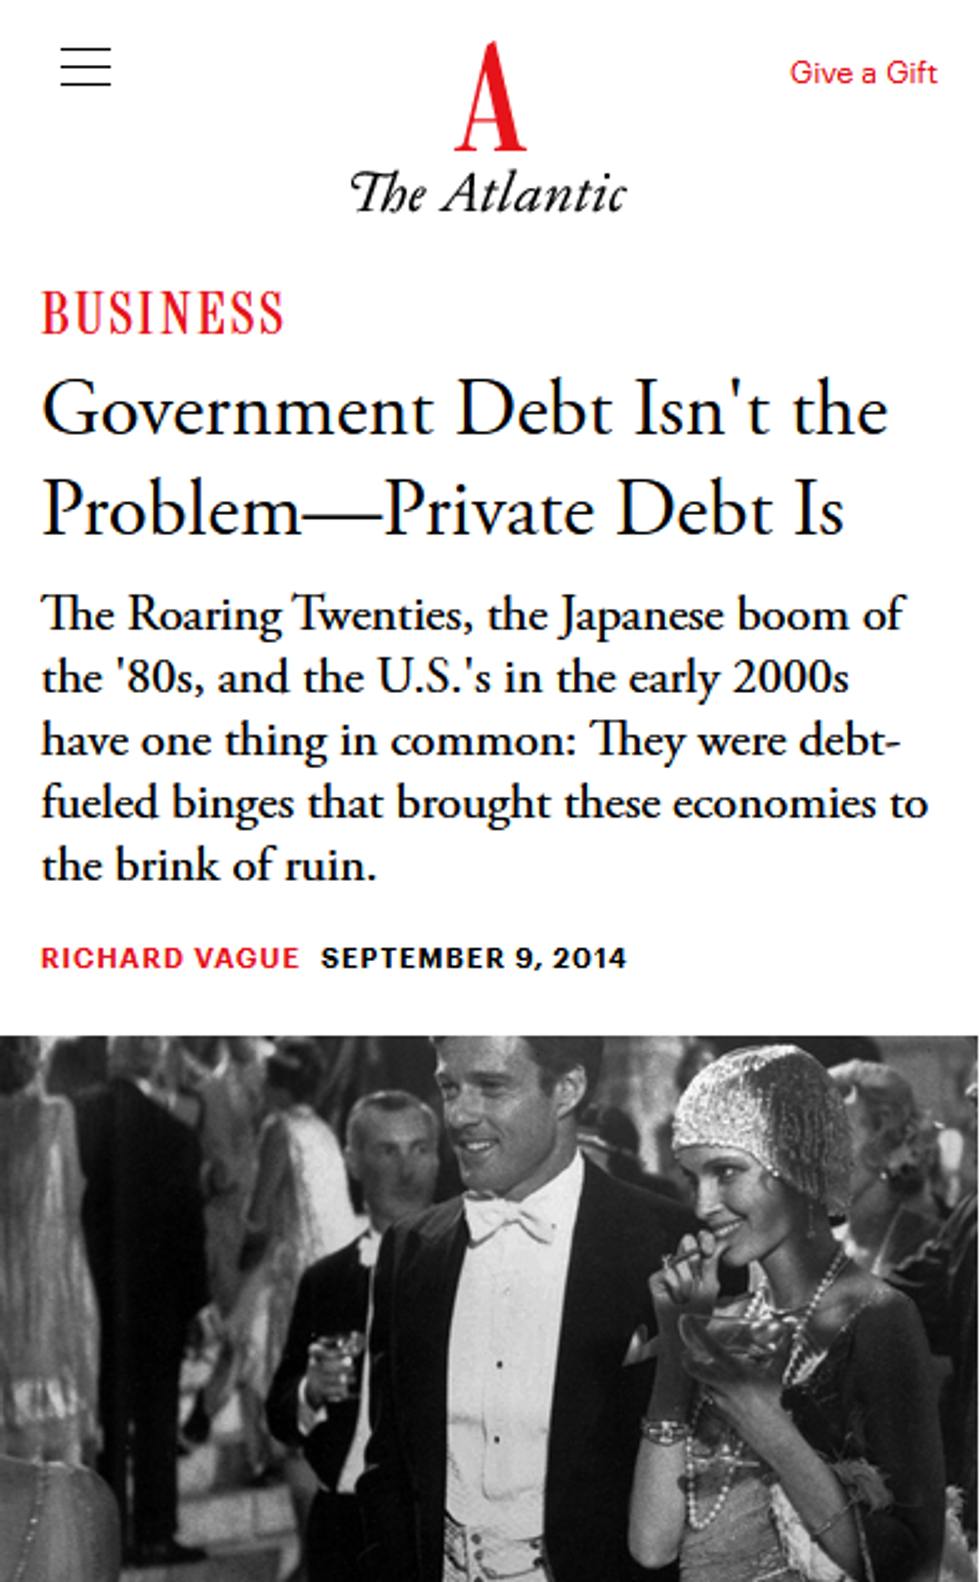 Atlantic: Government Debt Isn't the Problem--Private Debt Is